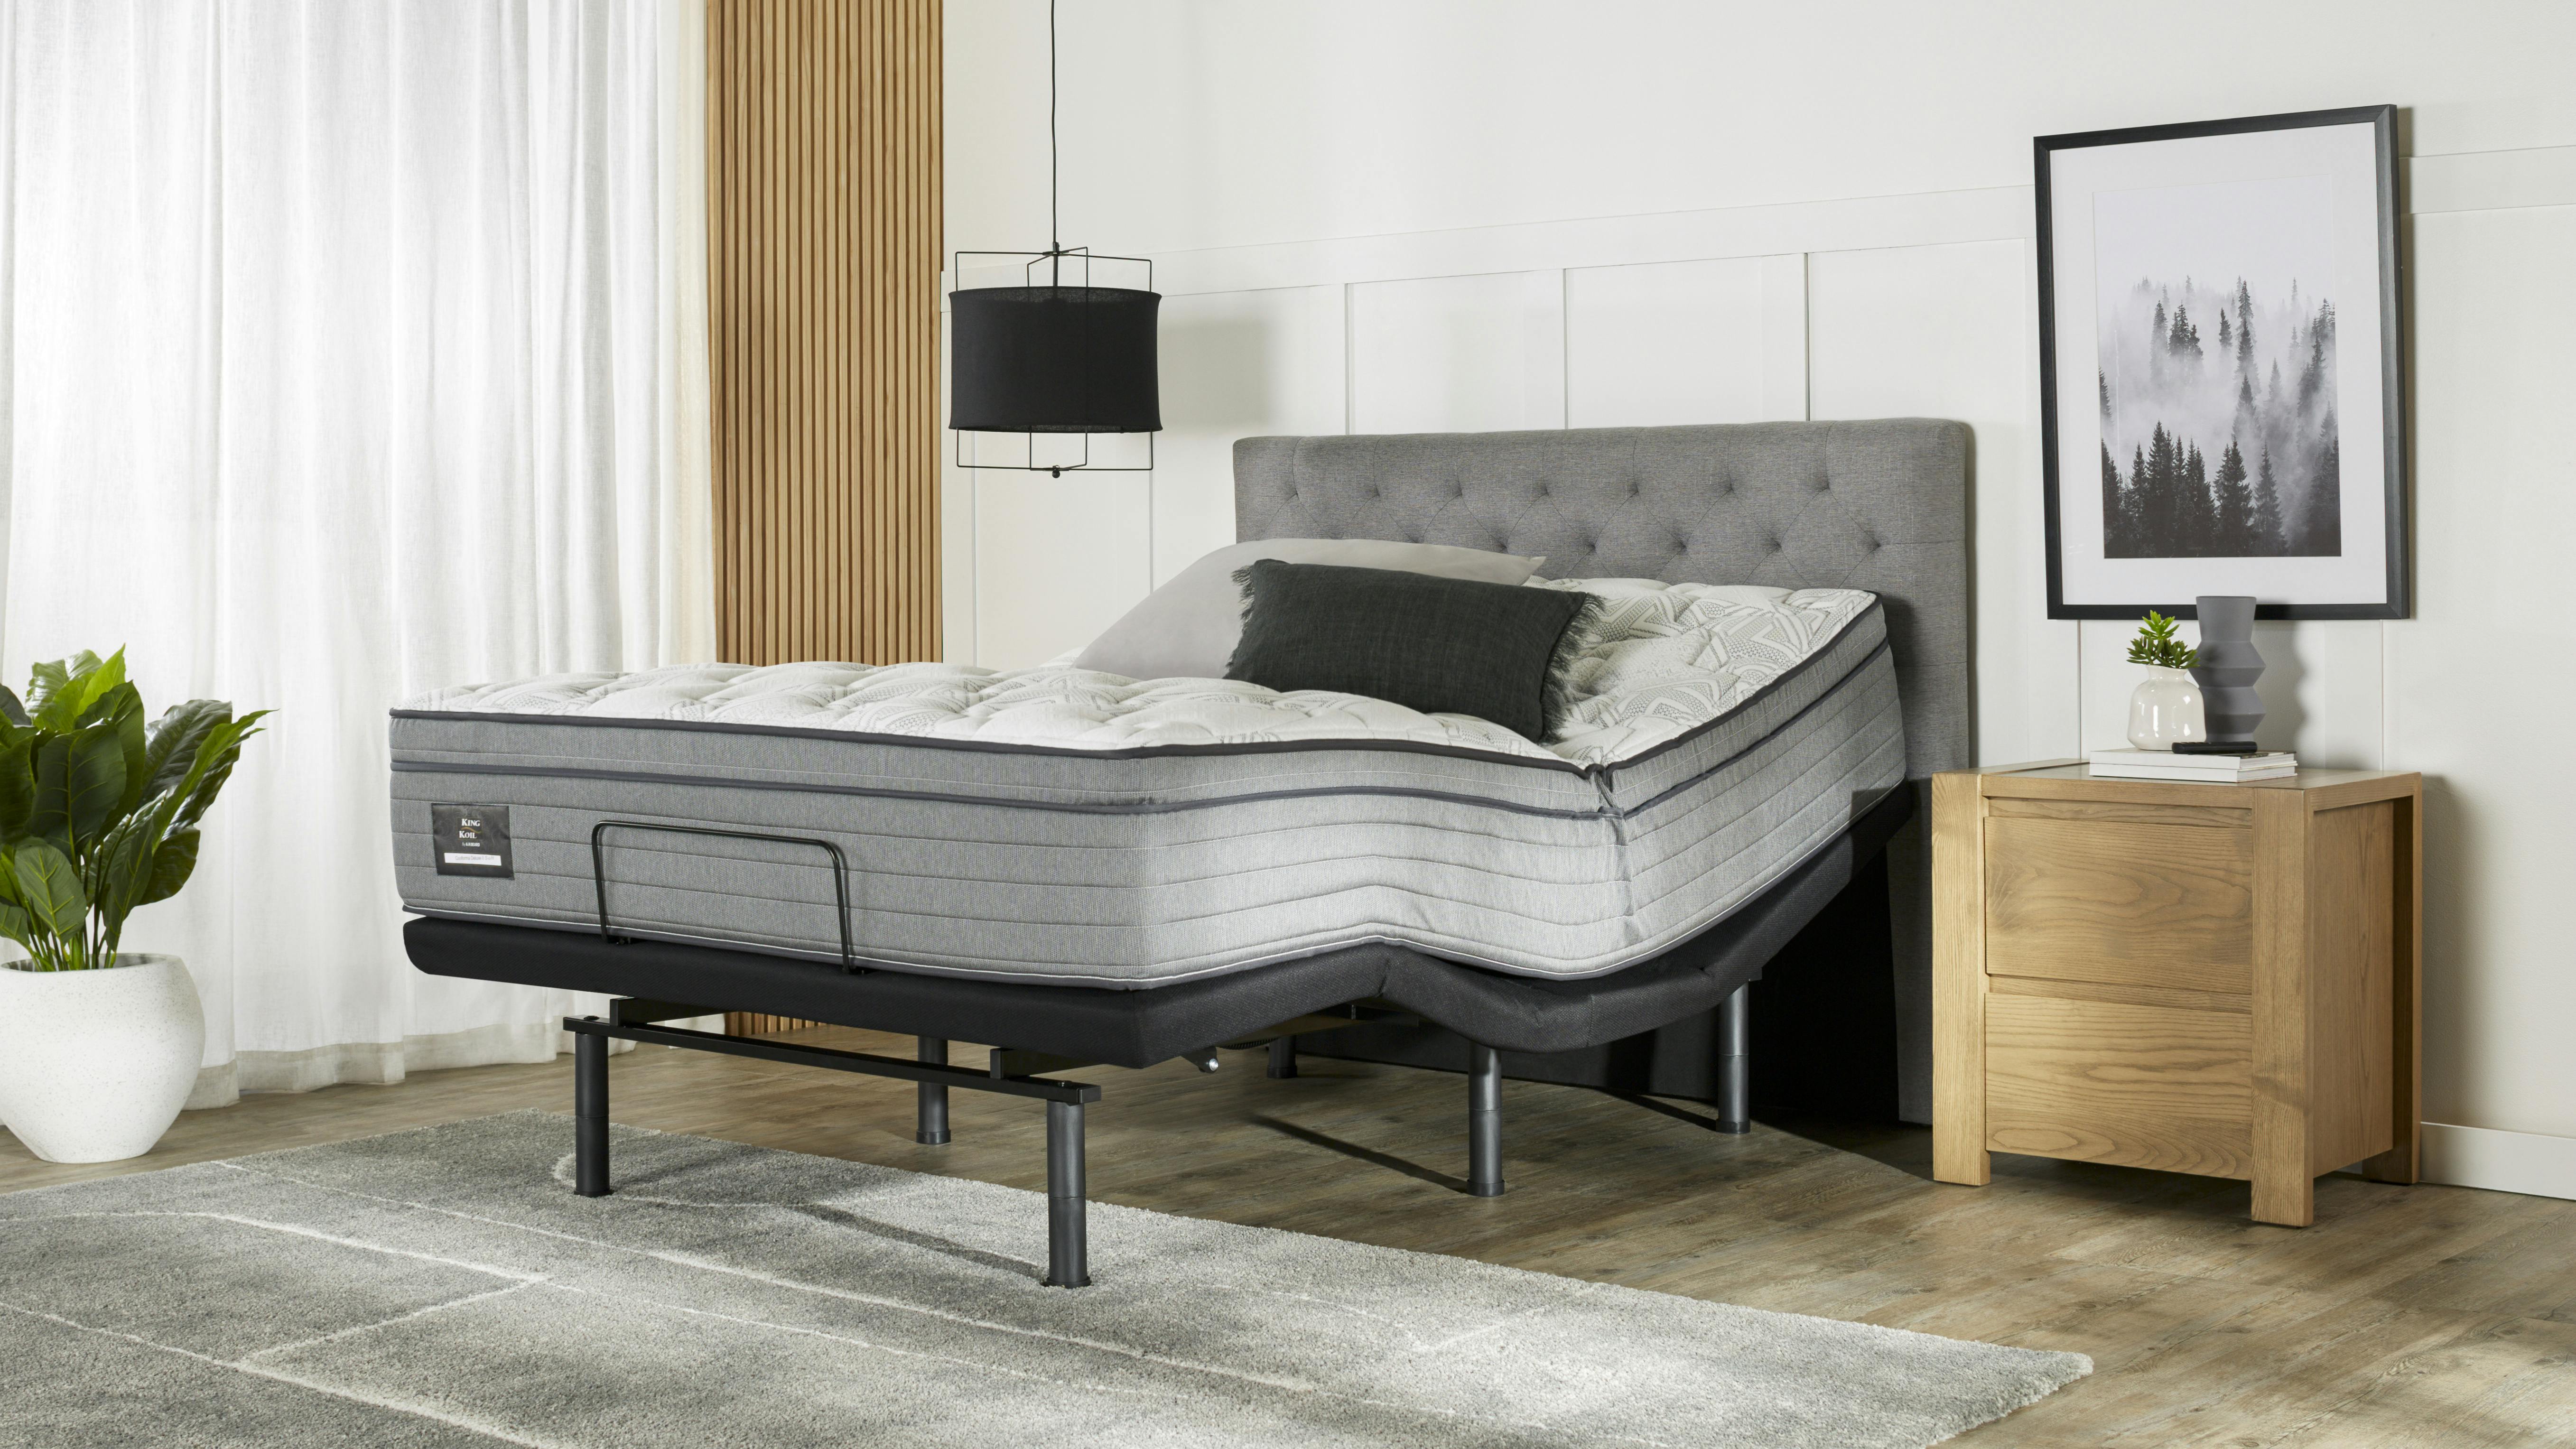 King Koil Conforma Deluxe II Soft Queen Mattress with Virtue Adjustable Base by A.H Beard